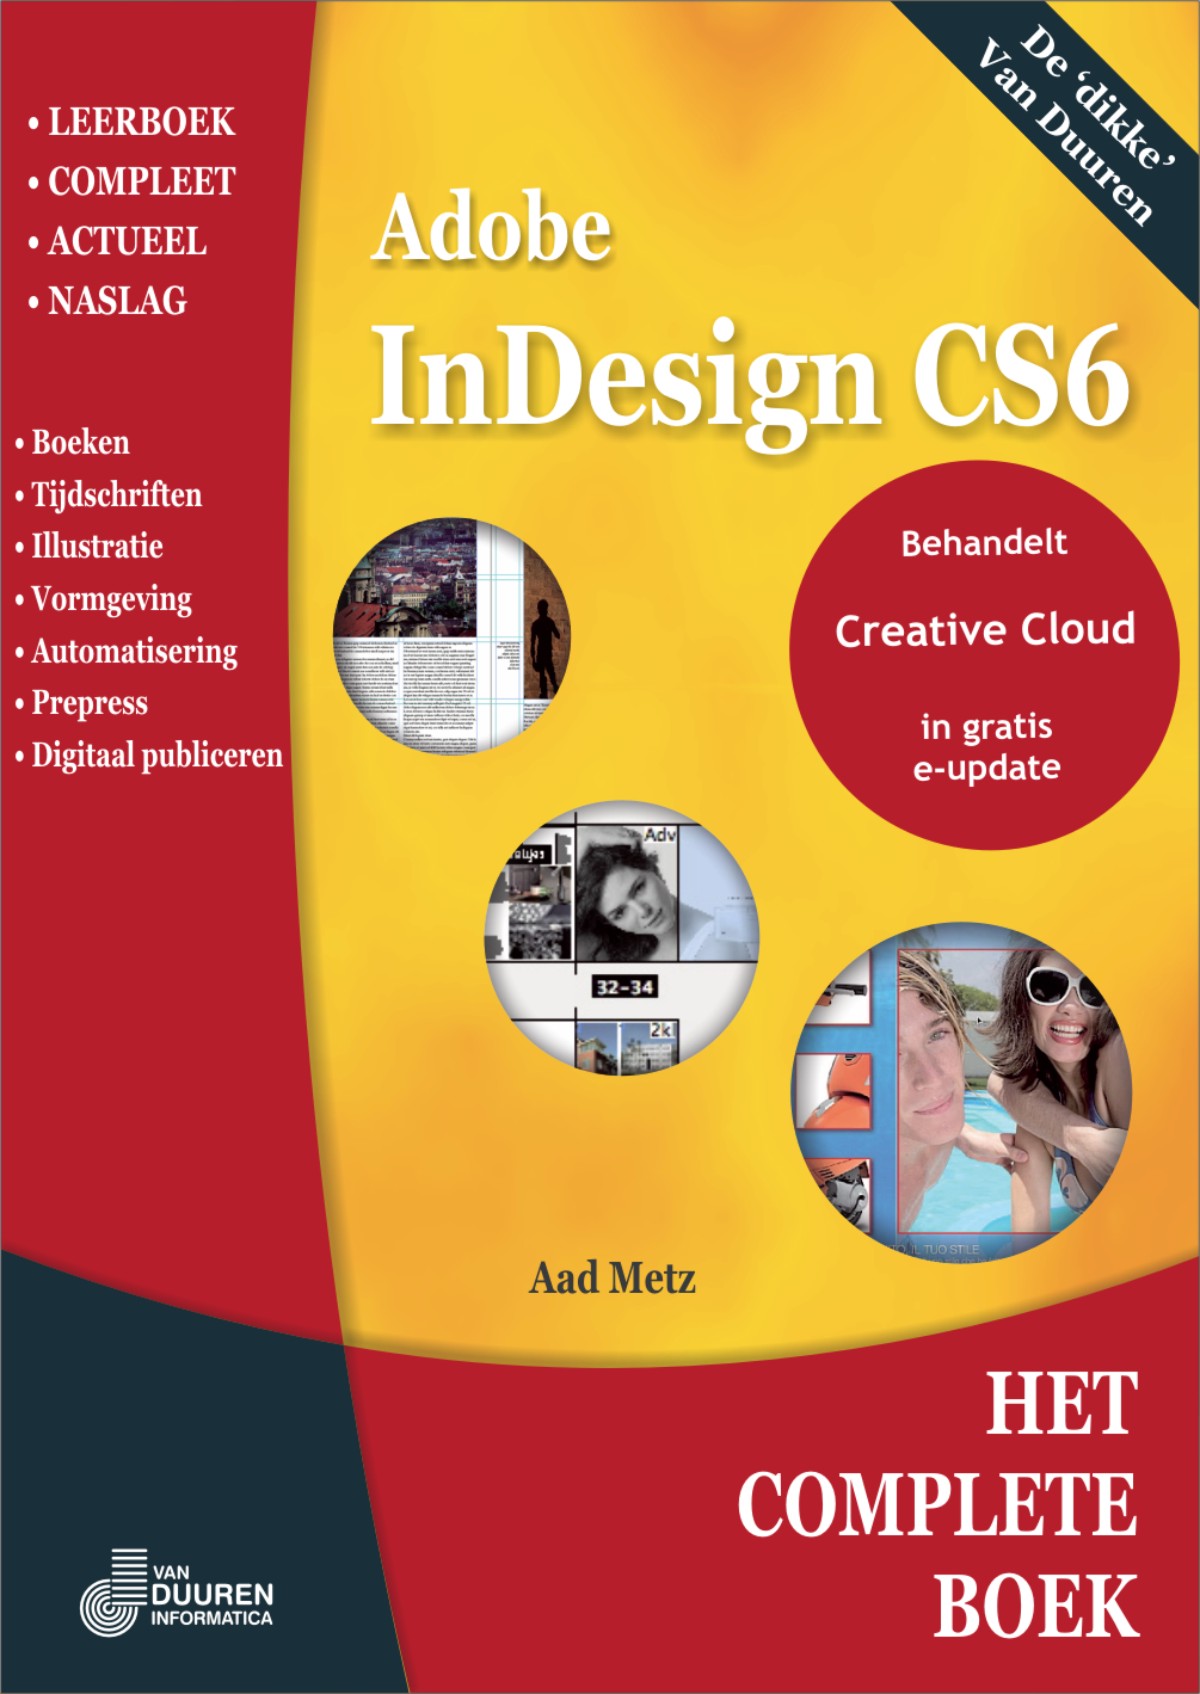 Adobe indesign cs6 user guide pdf - acetocal